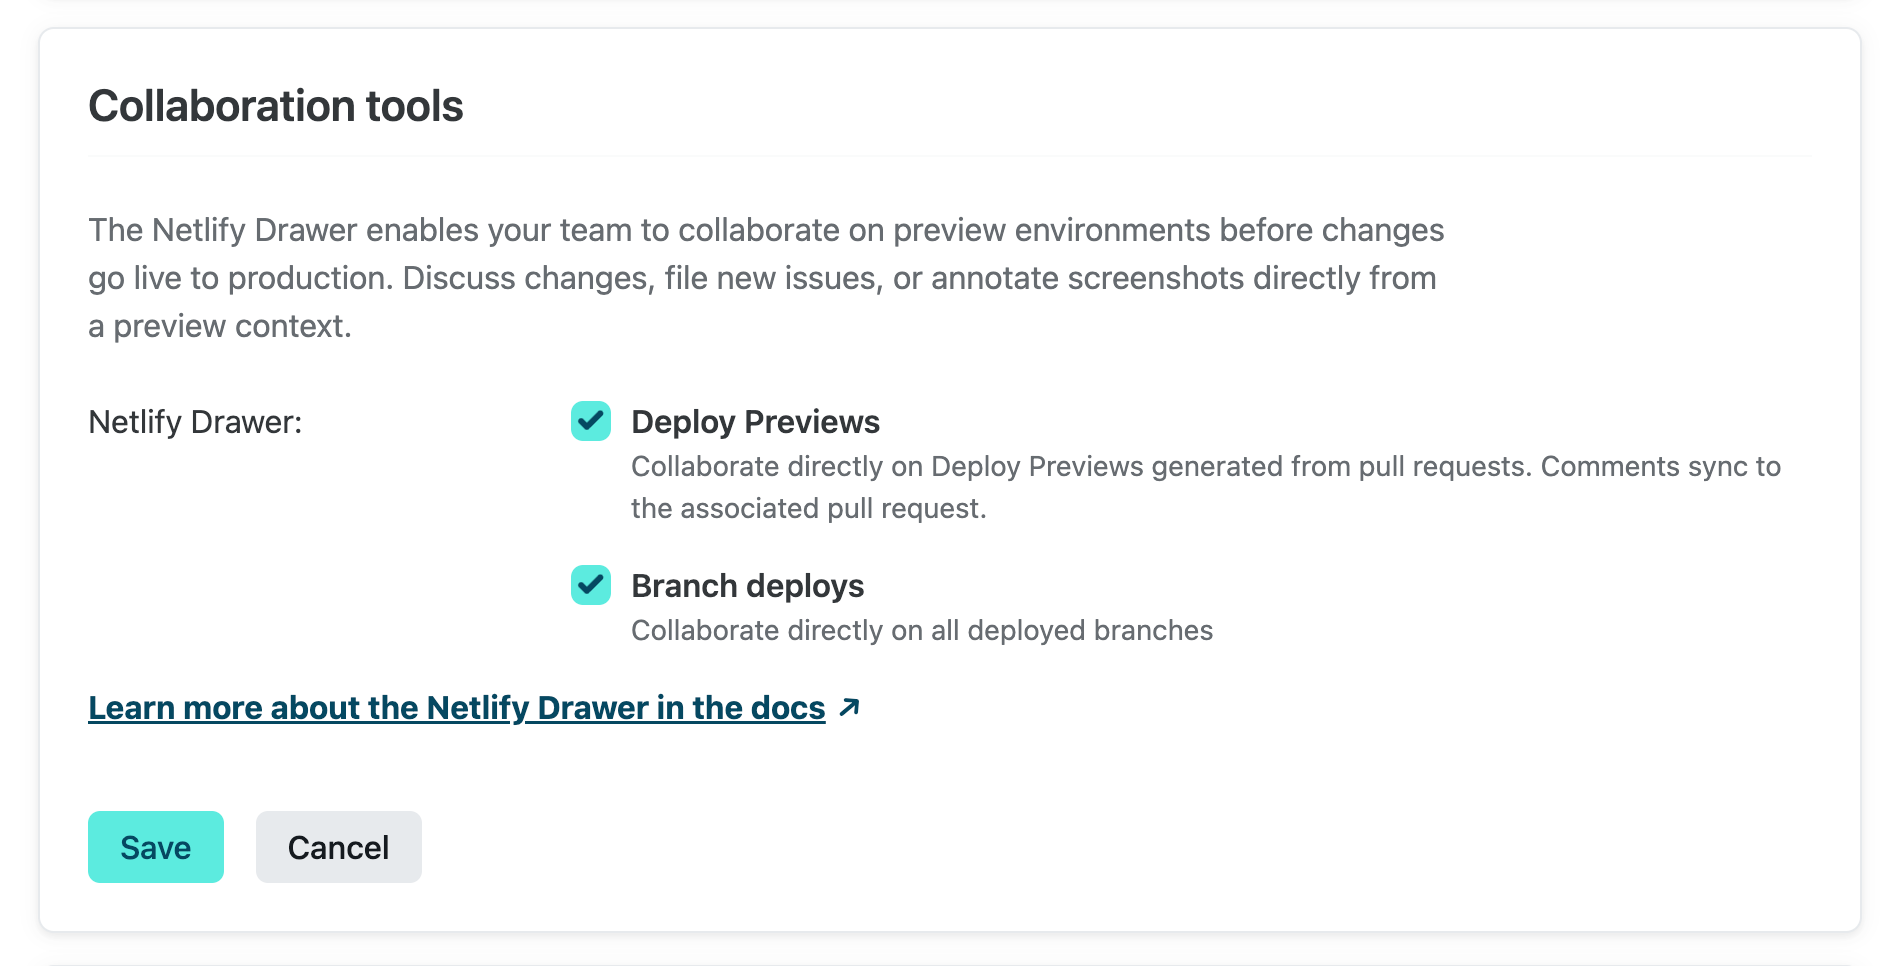 Collaboration tools with settings to enable or disable the Netlify Drawer